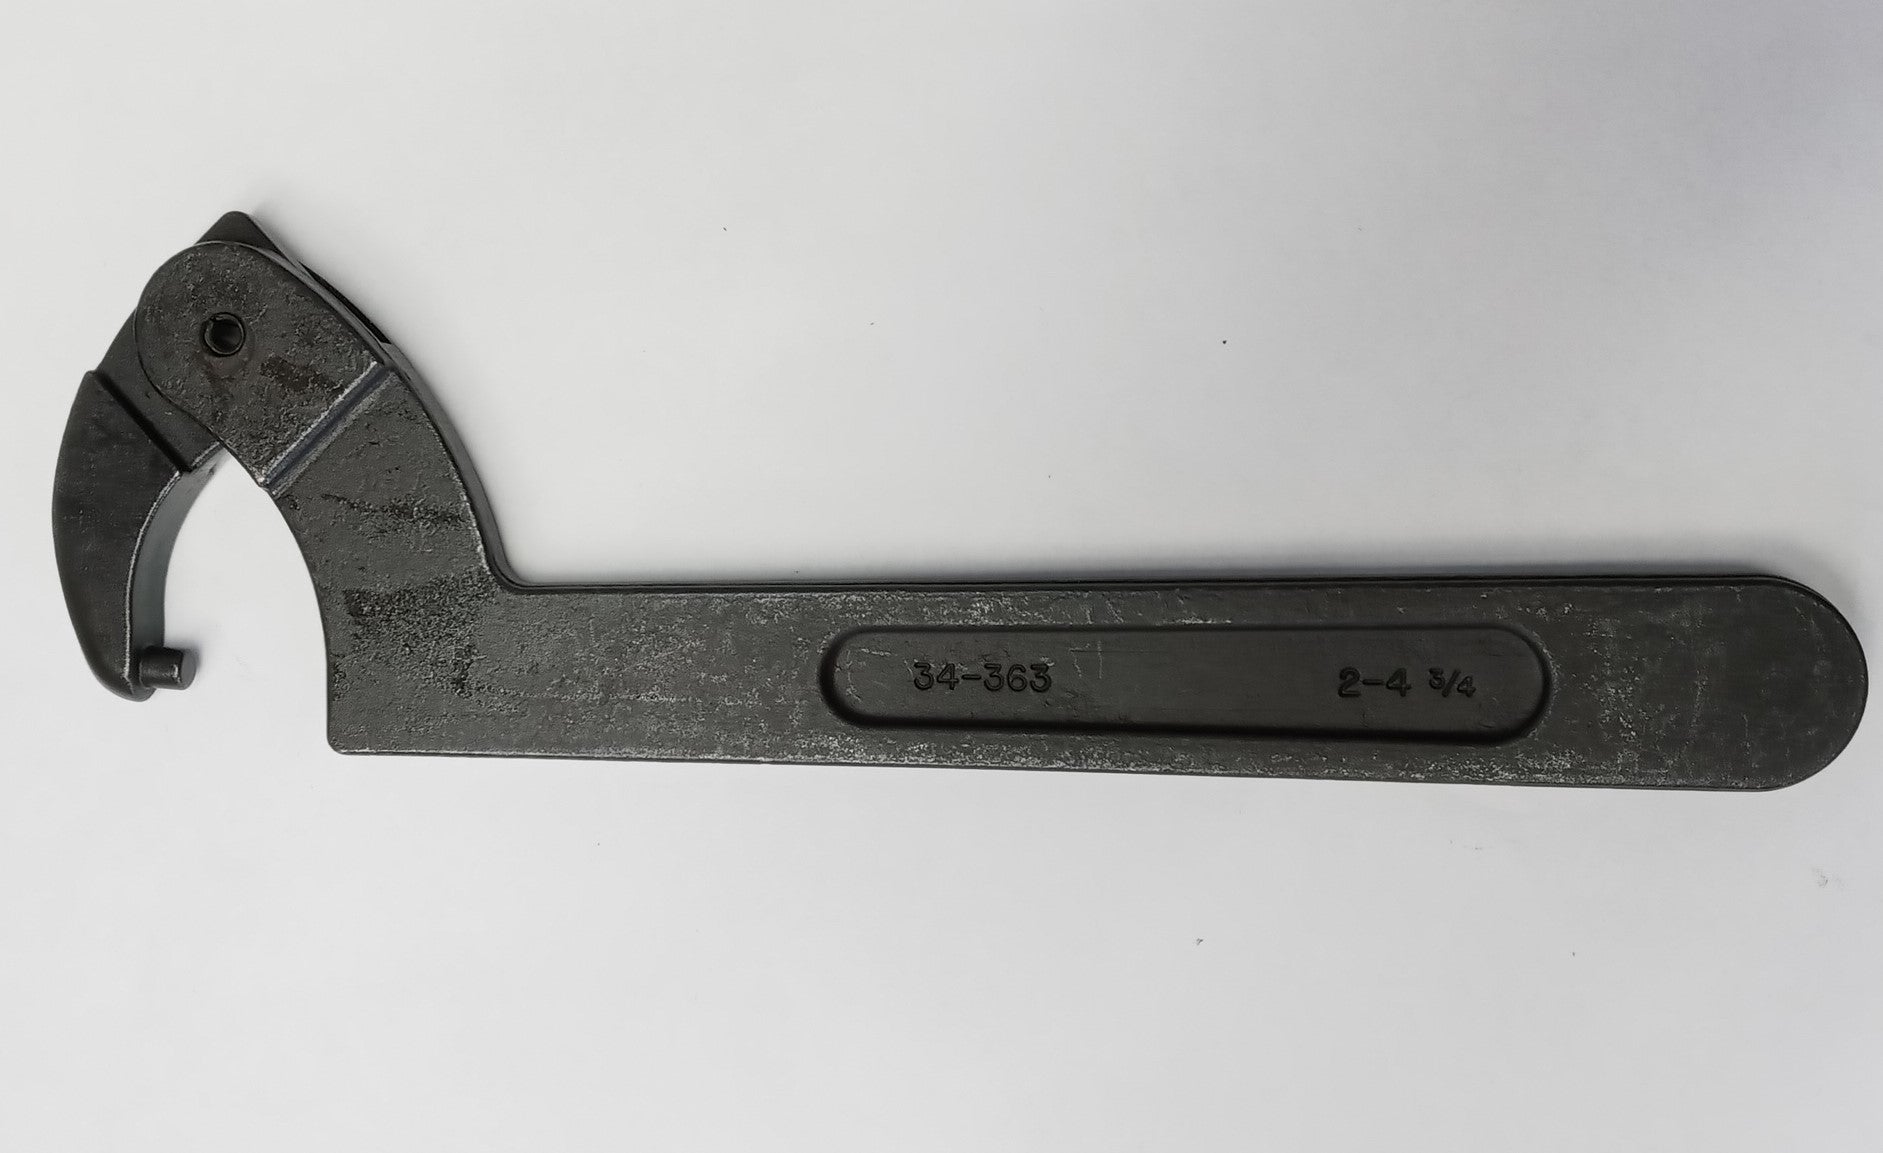 ARMSTRONG TOOLS 34-363 Adjustable Pin Spanner Wrench